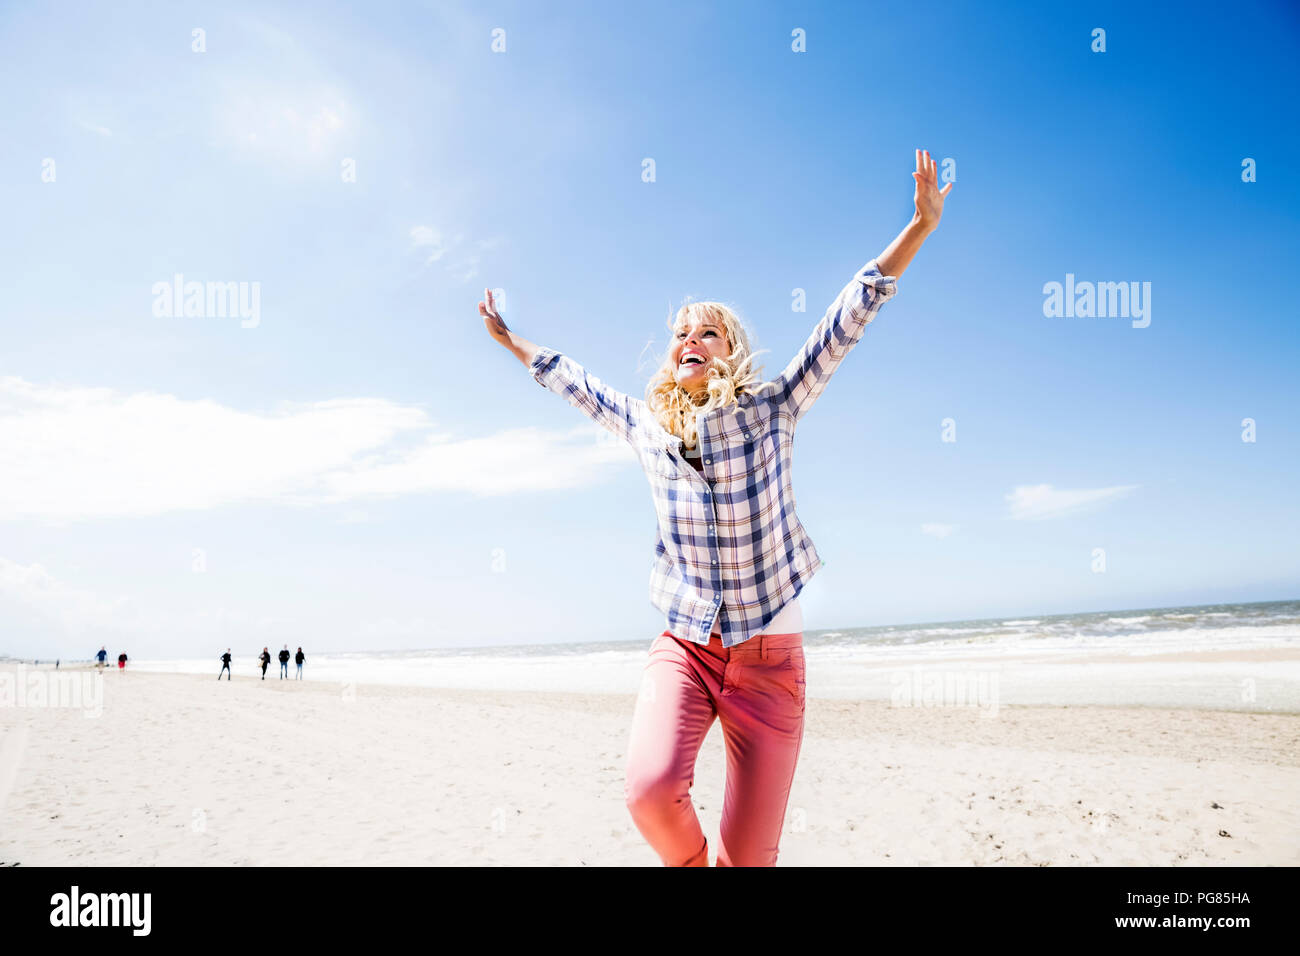 Carefree woman on the beach Banque D'Images